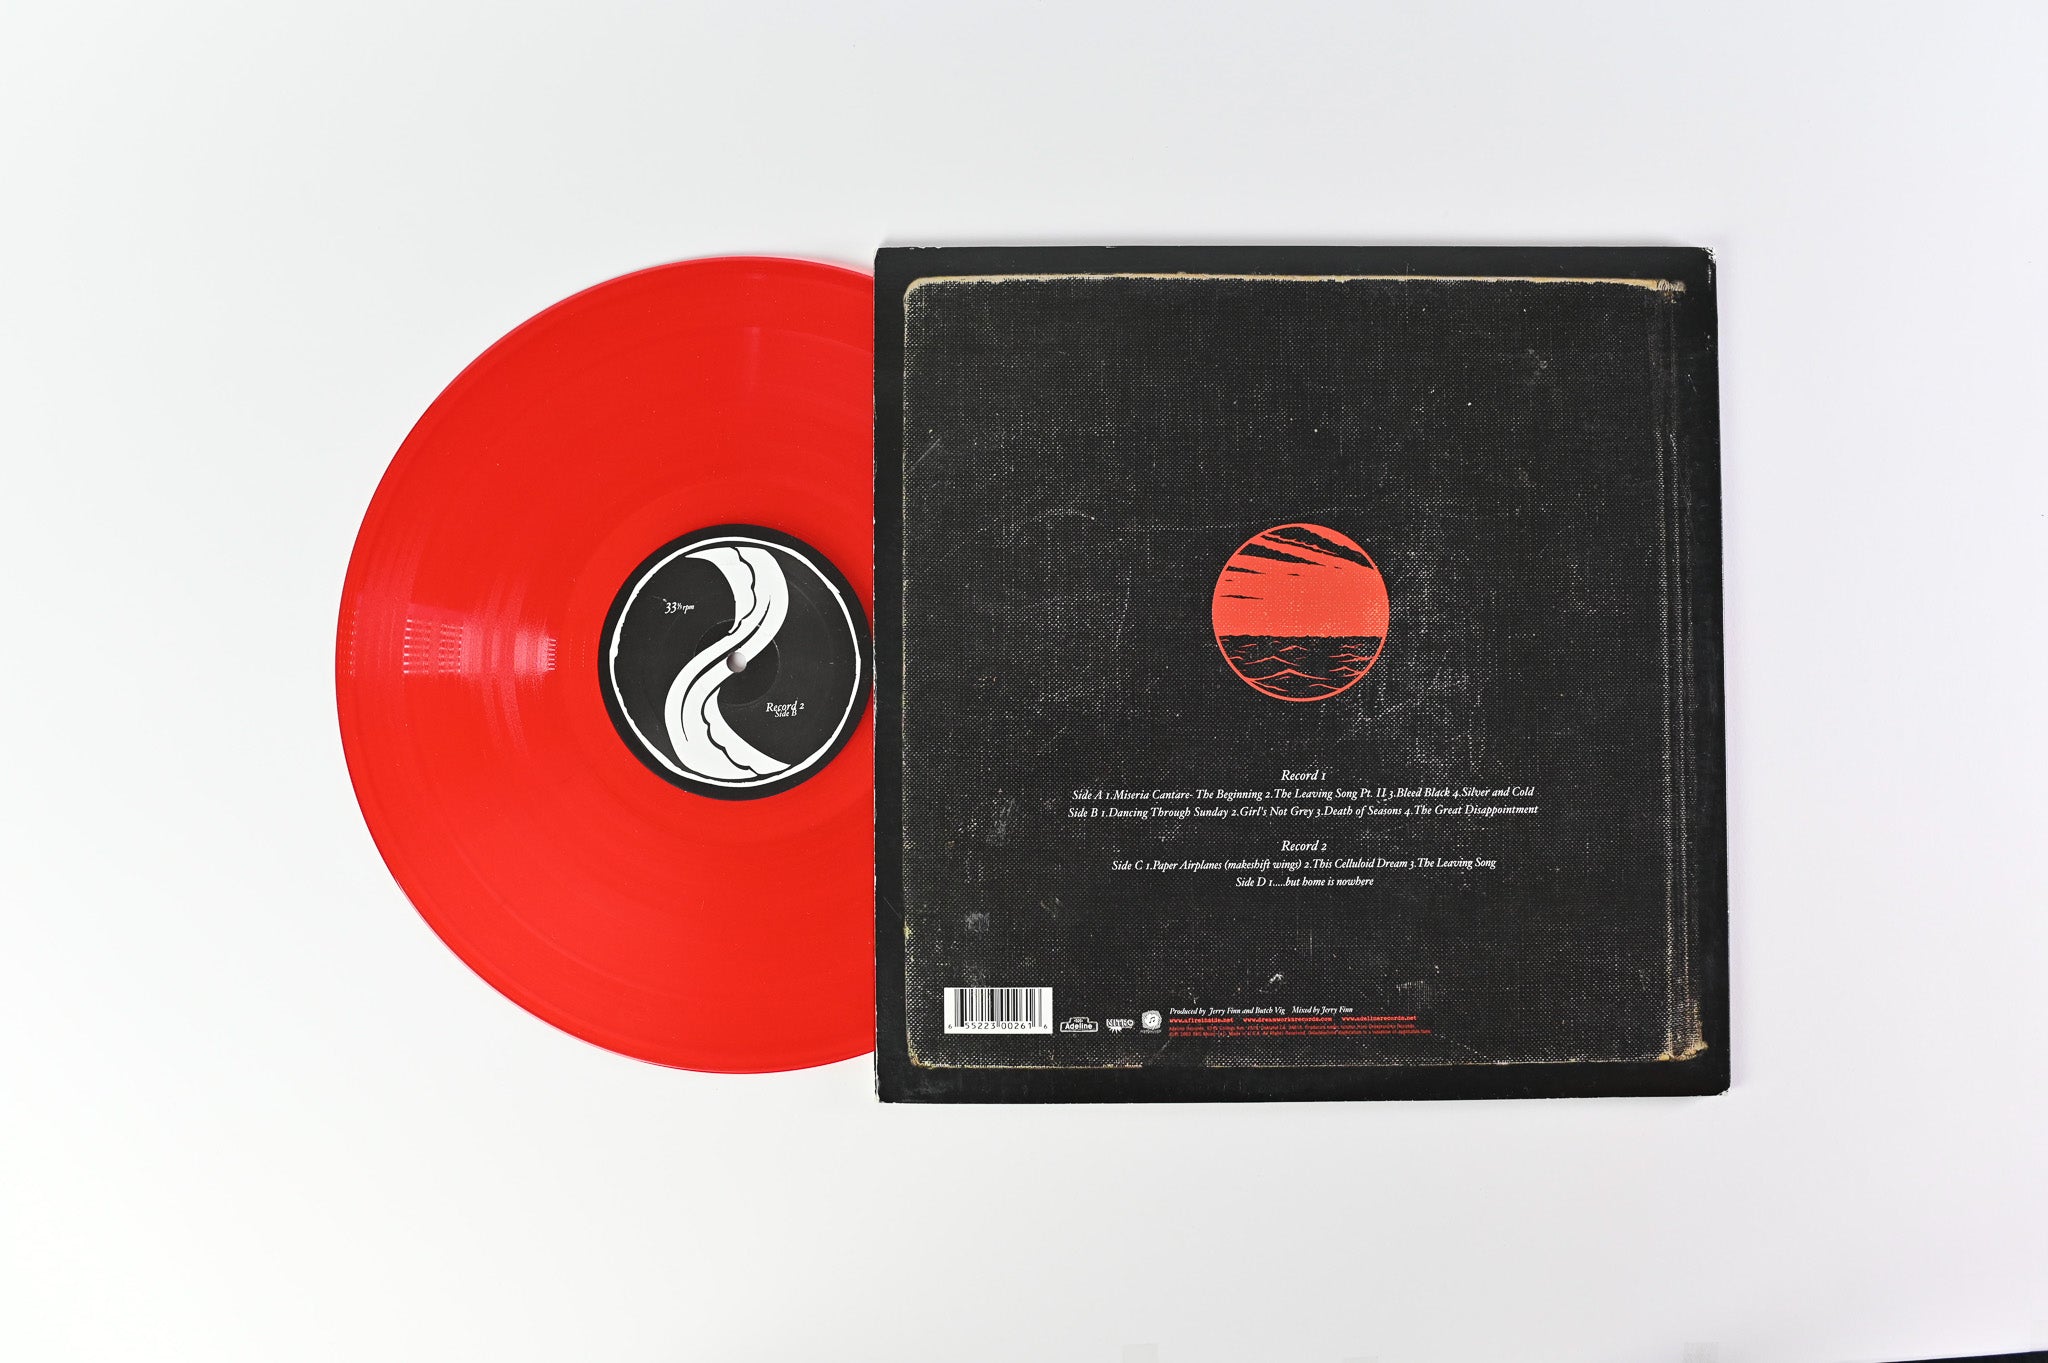 AFI - Sing The Sorrow on Adeline Records Red Translucent Vinyl